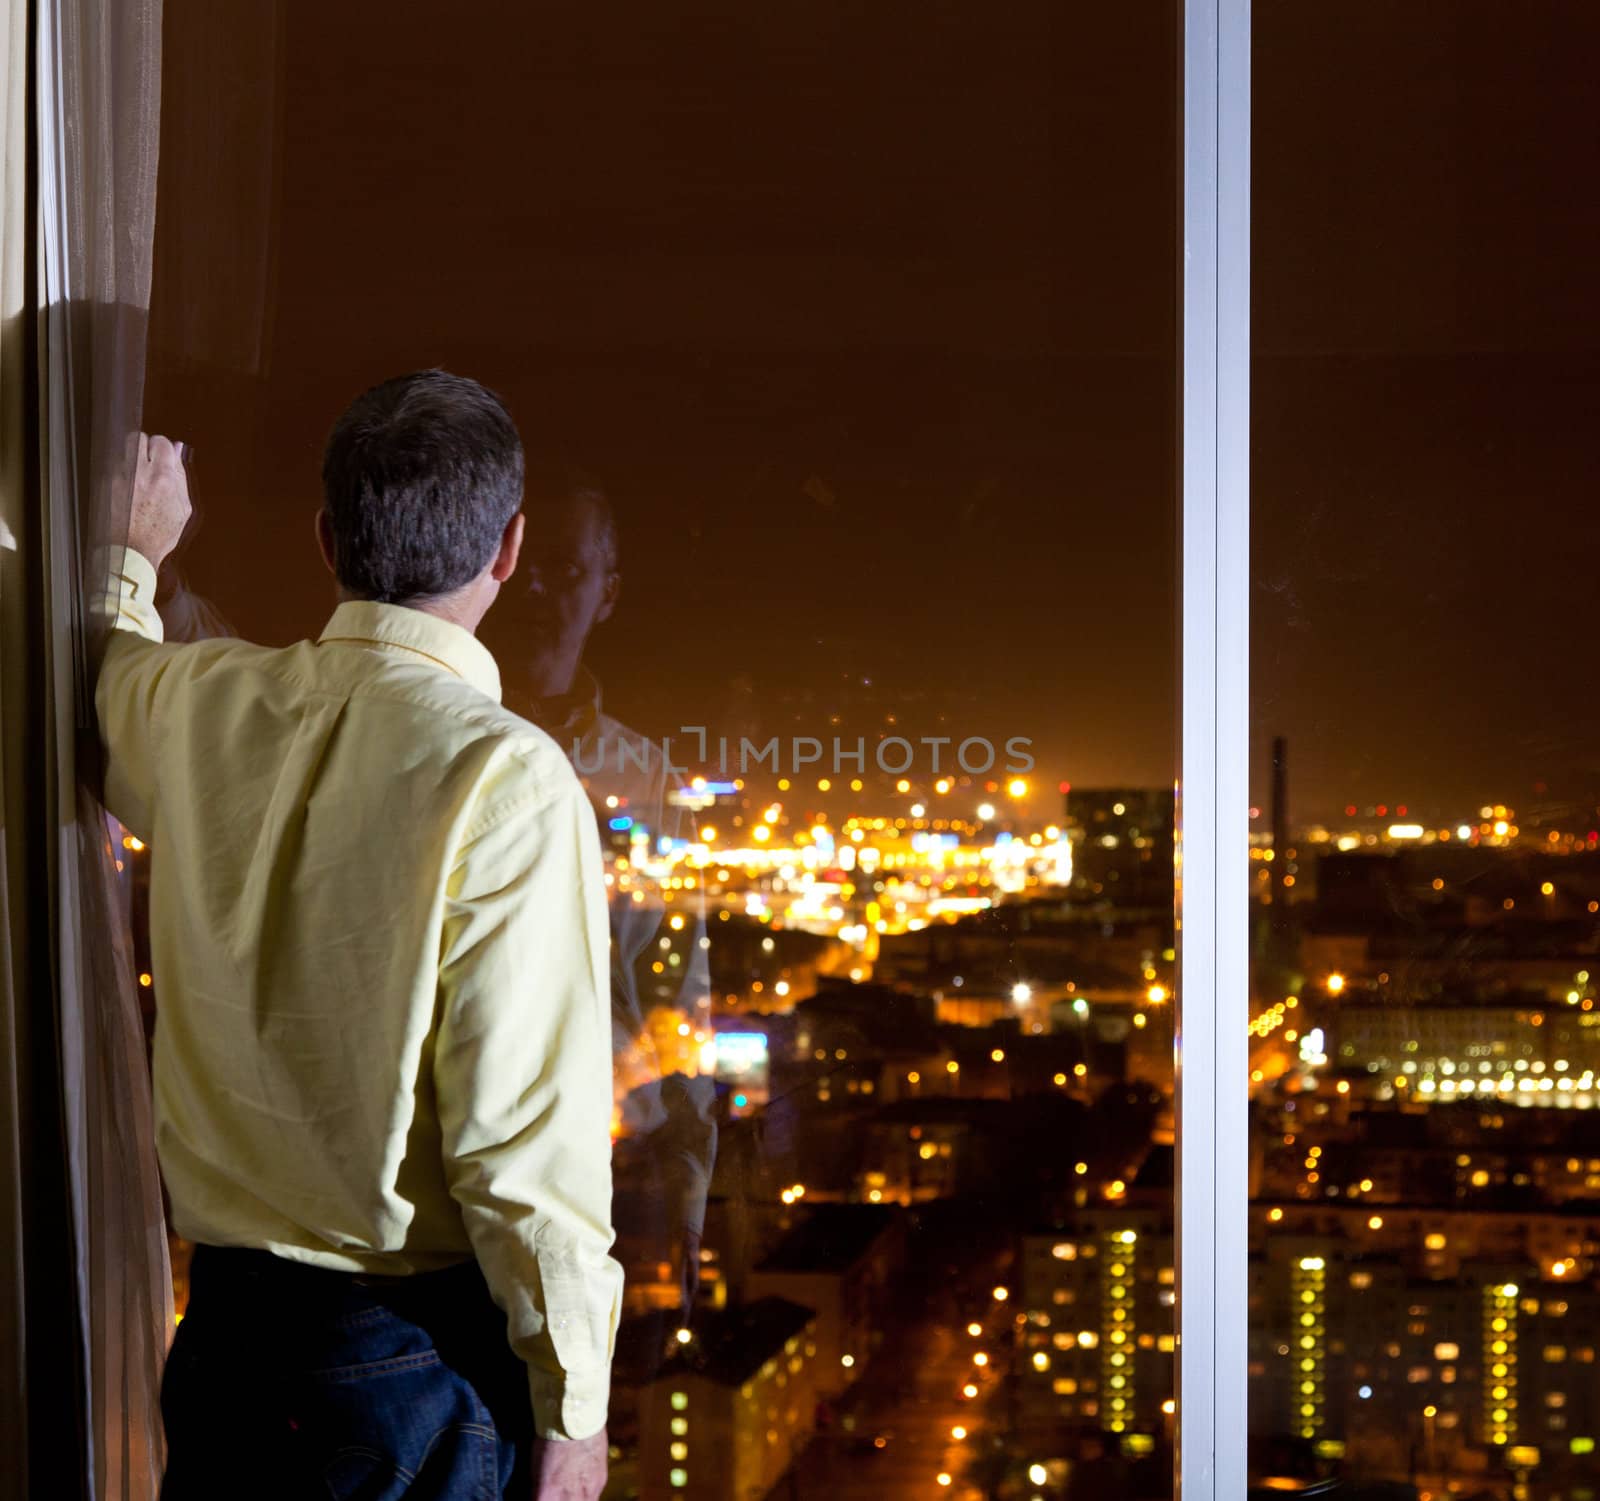 Middle aged man looking out over a city from a high window in a hotel or office